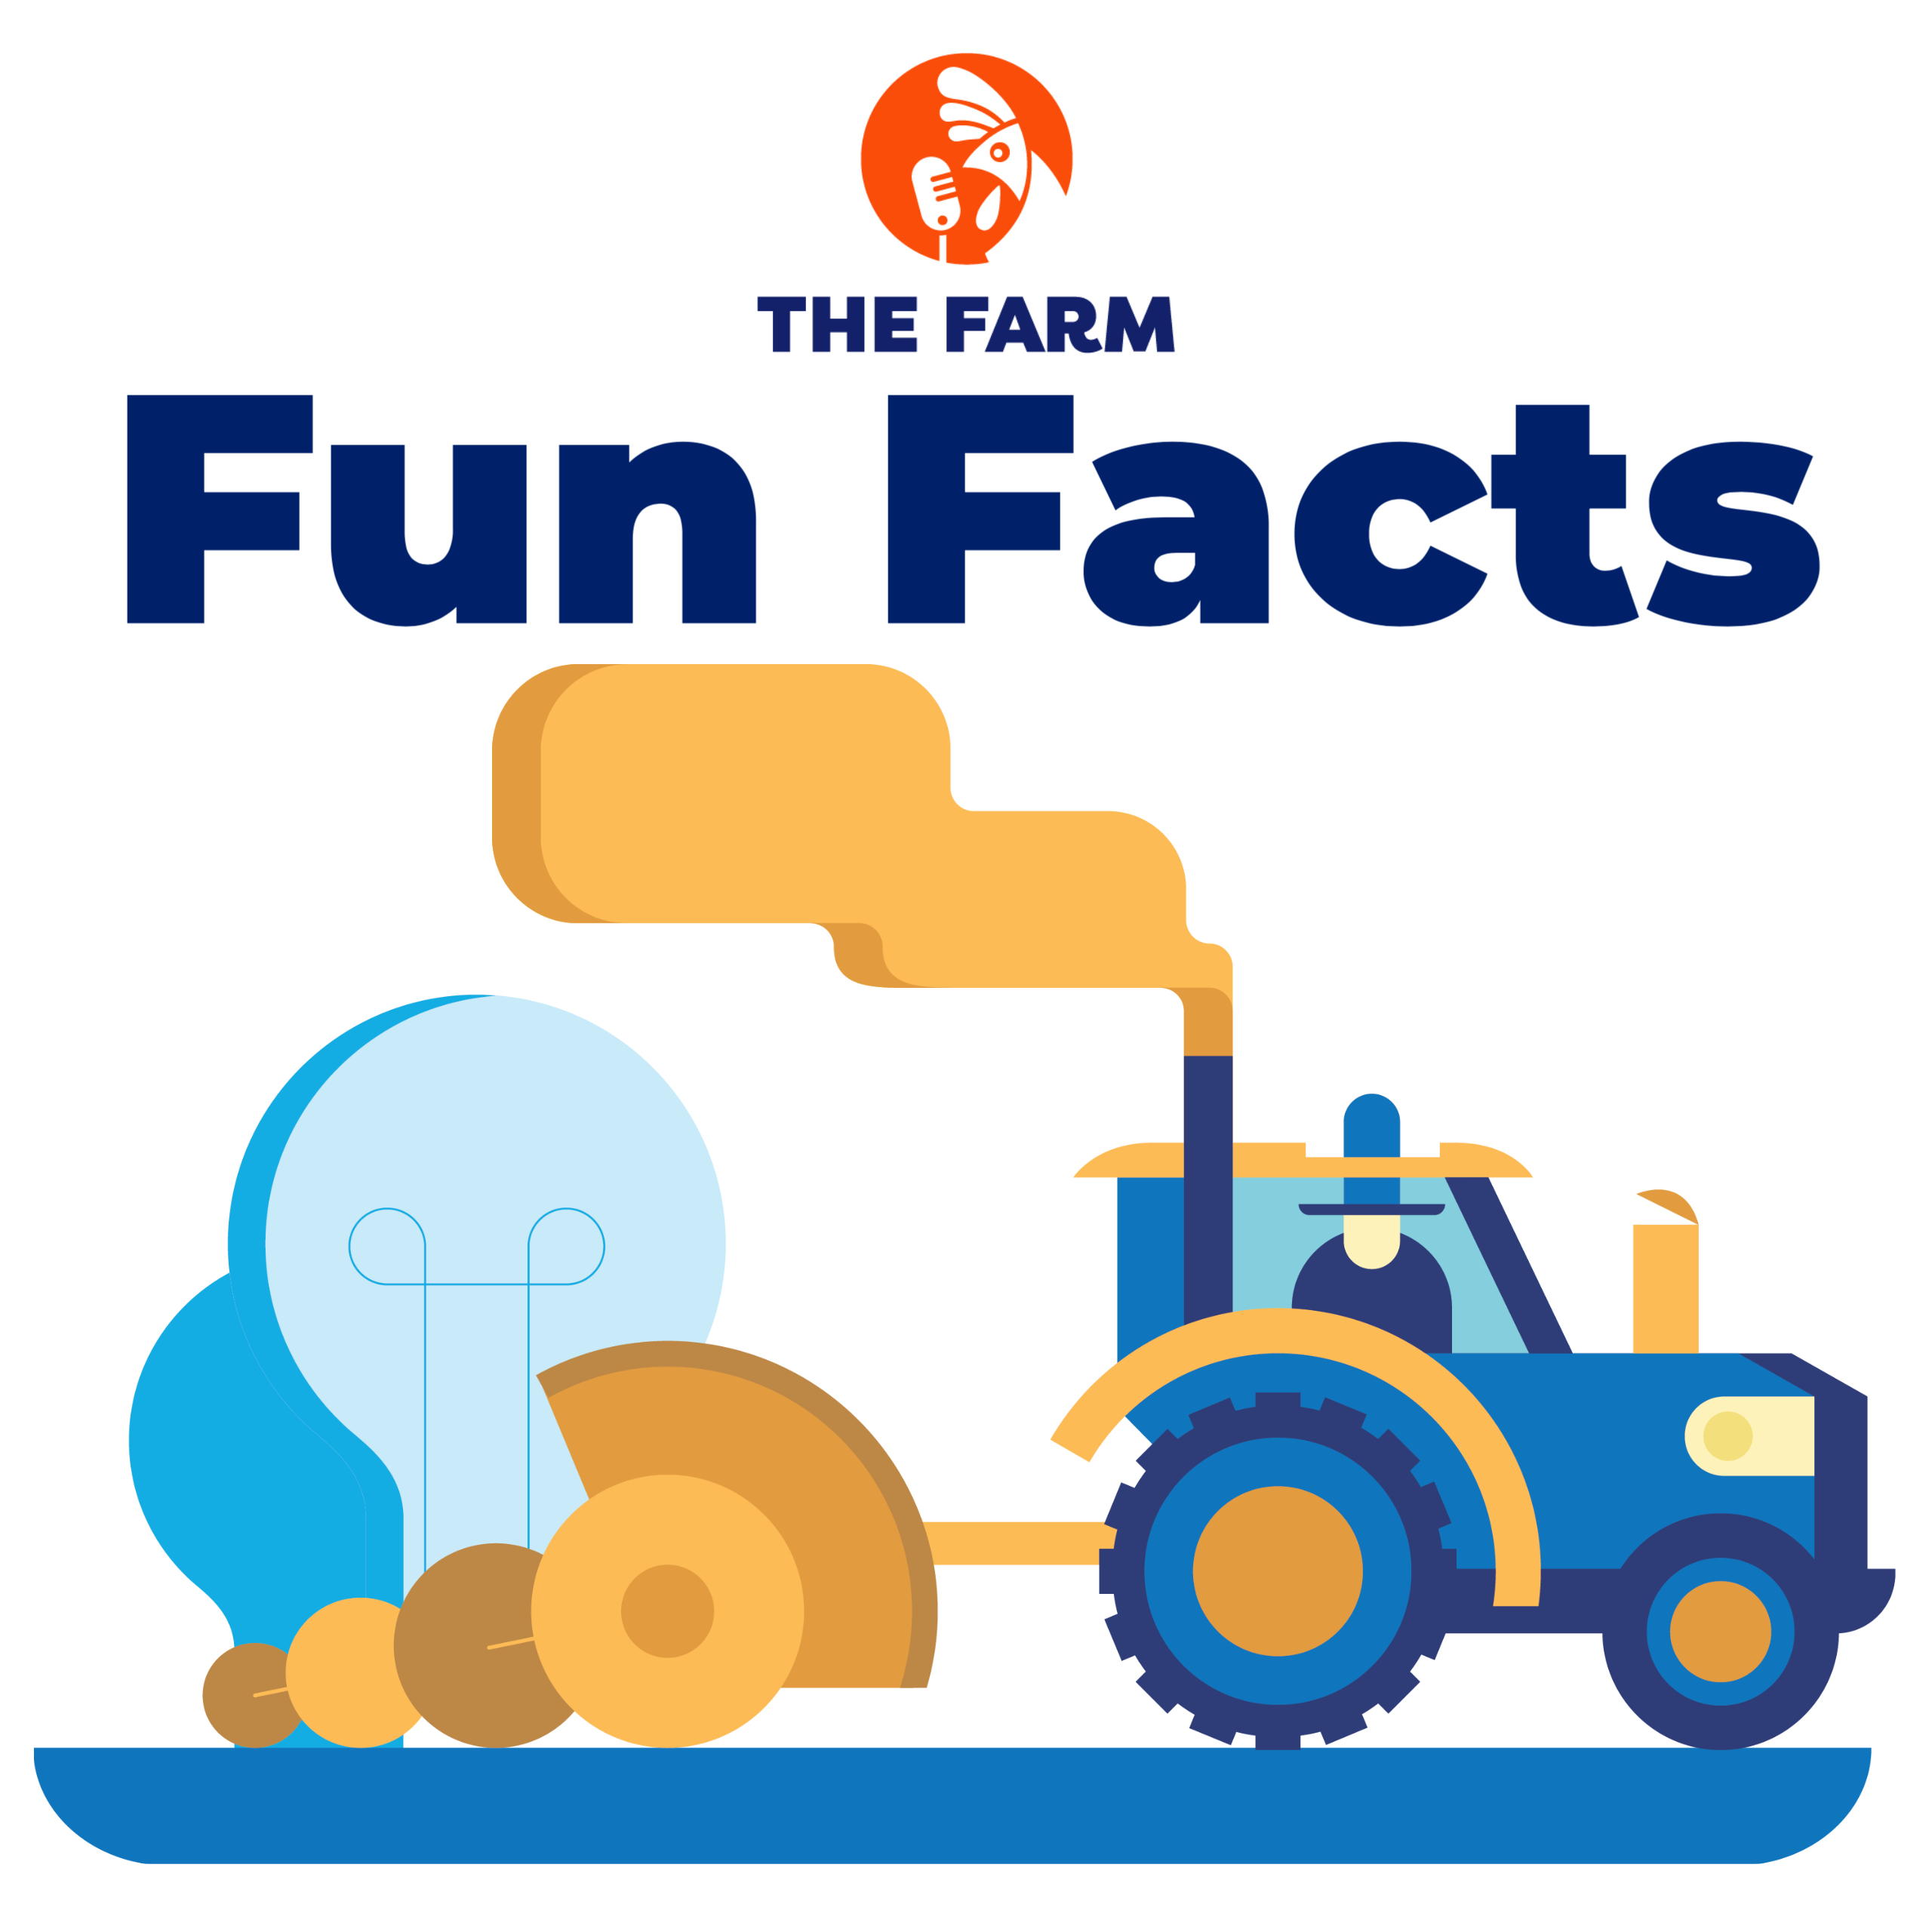 https://stratus.campaign-image.com/images/78131000038799057_zc_v1_1711992287540_the_farm_fun_facts_tractor1_1.jpg